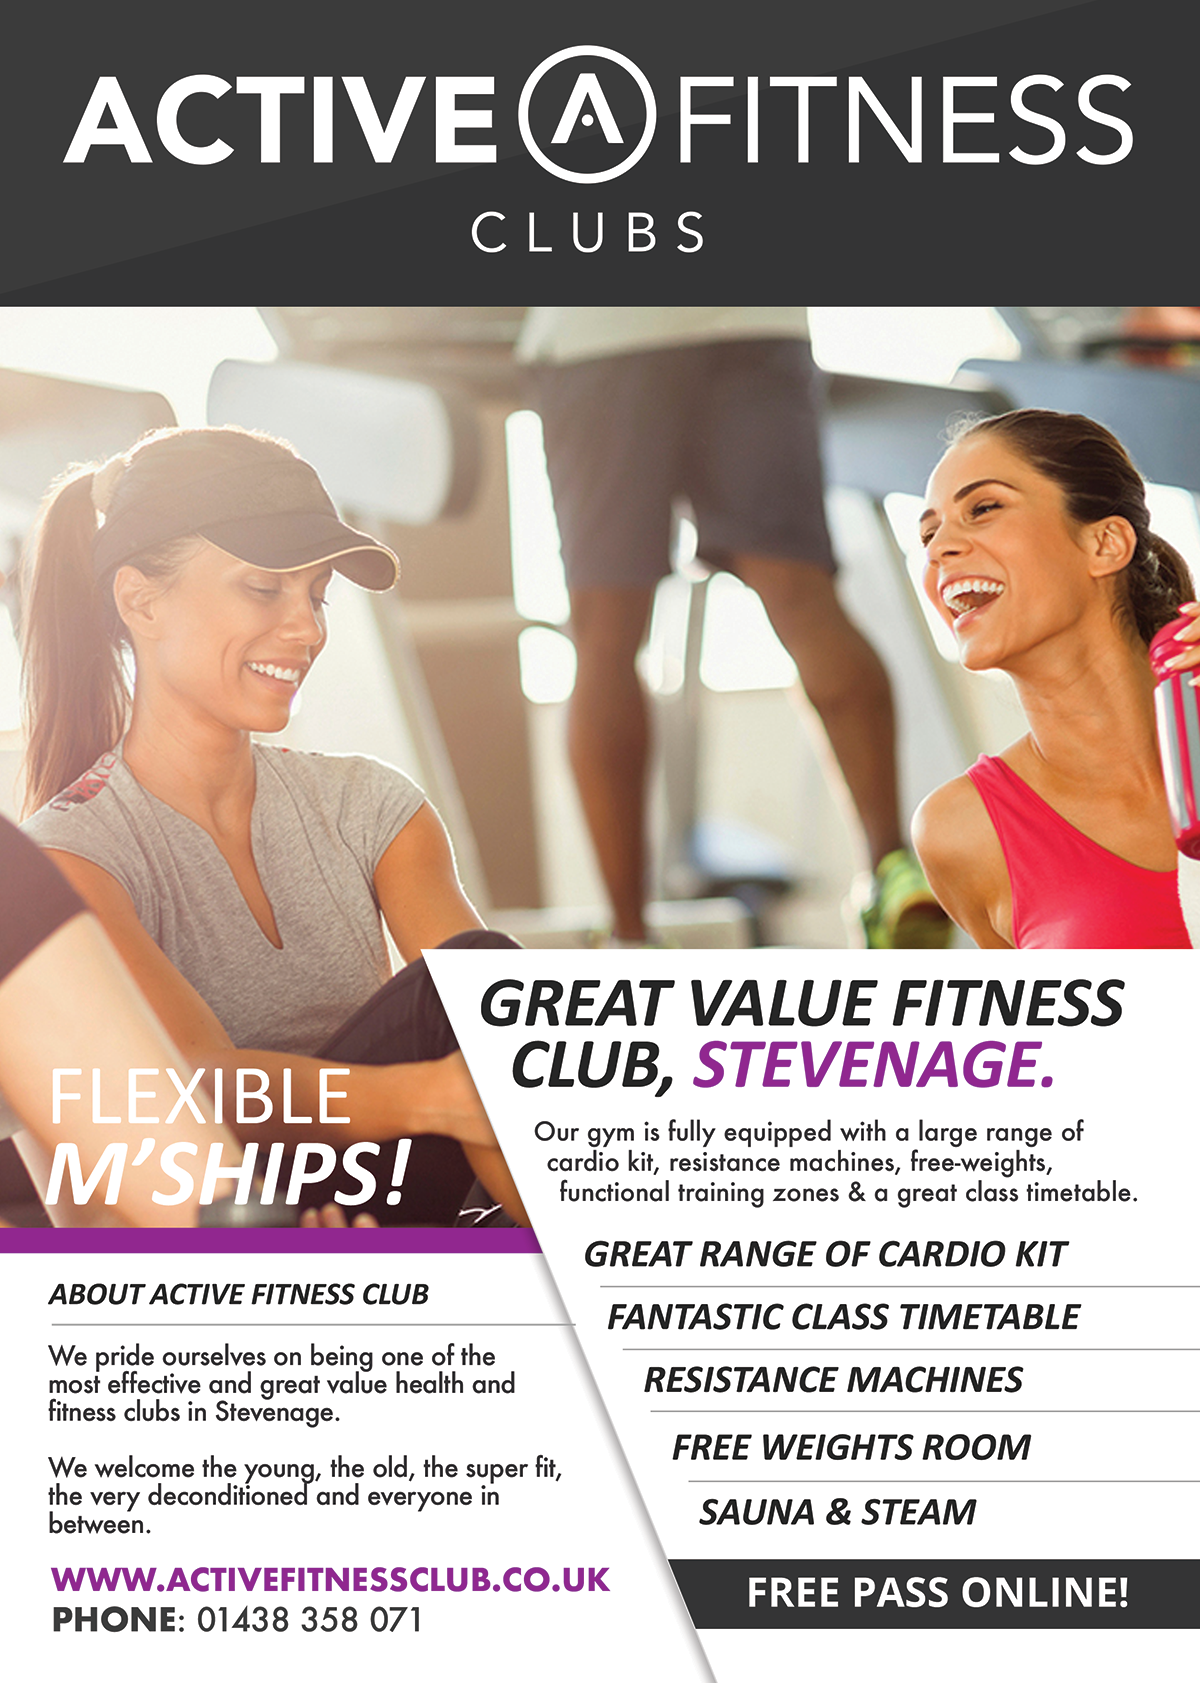 Active-Fitness-Club-Flyer-Designed-By-Fortune-Design